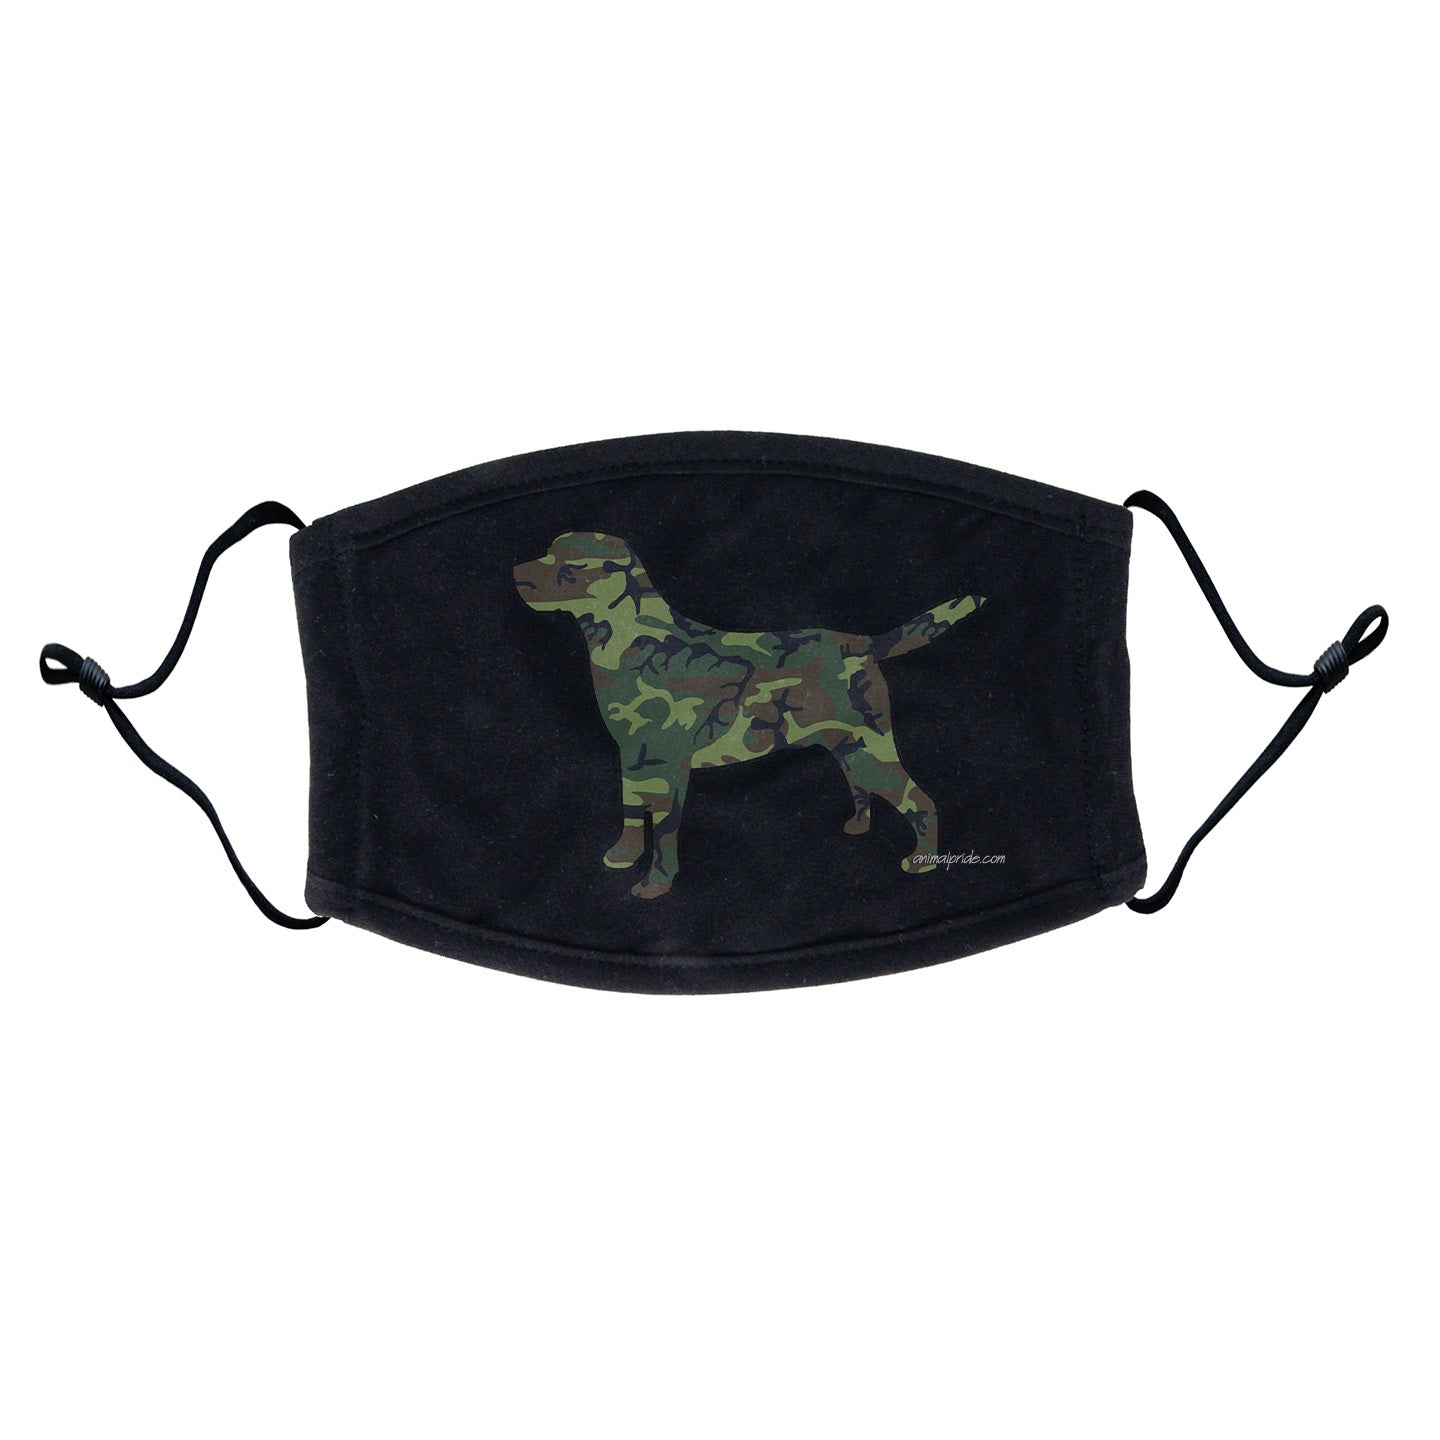 Labrador Silhouette Woodland Camouflage Face Mask - Adjustable Ear Loops, Reusable & Washable, Cloth - Animal Pride